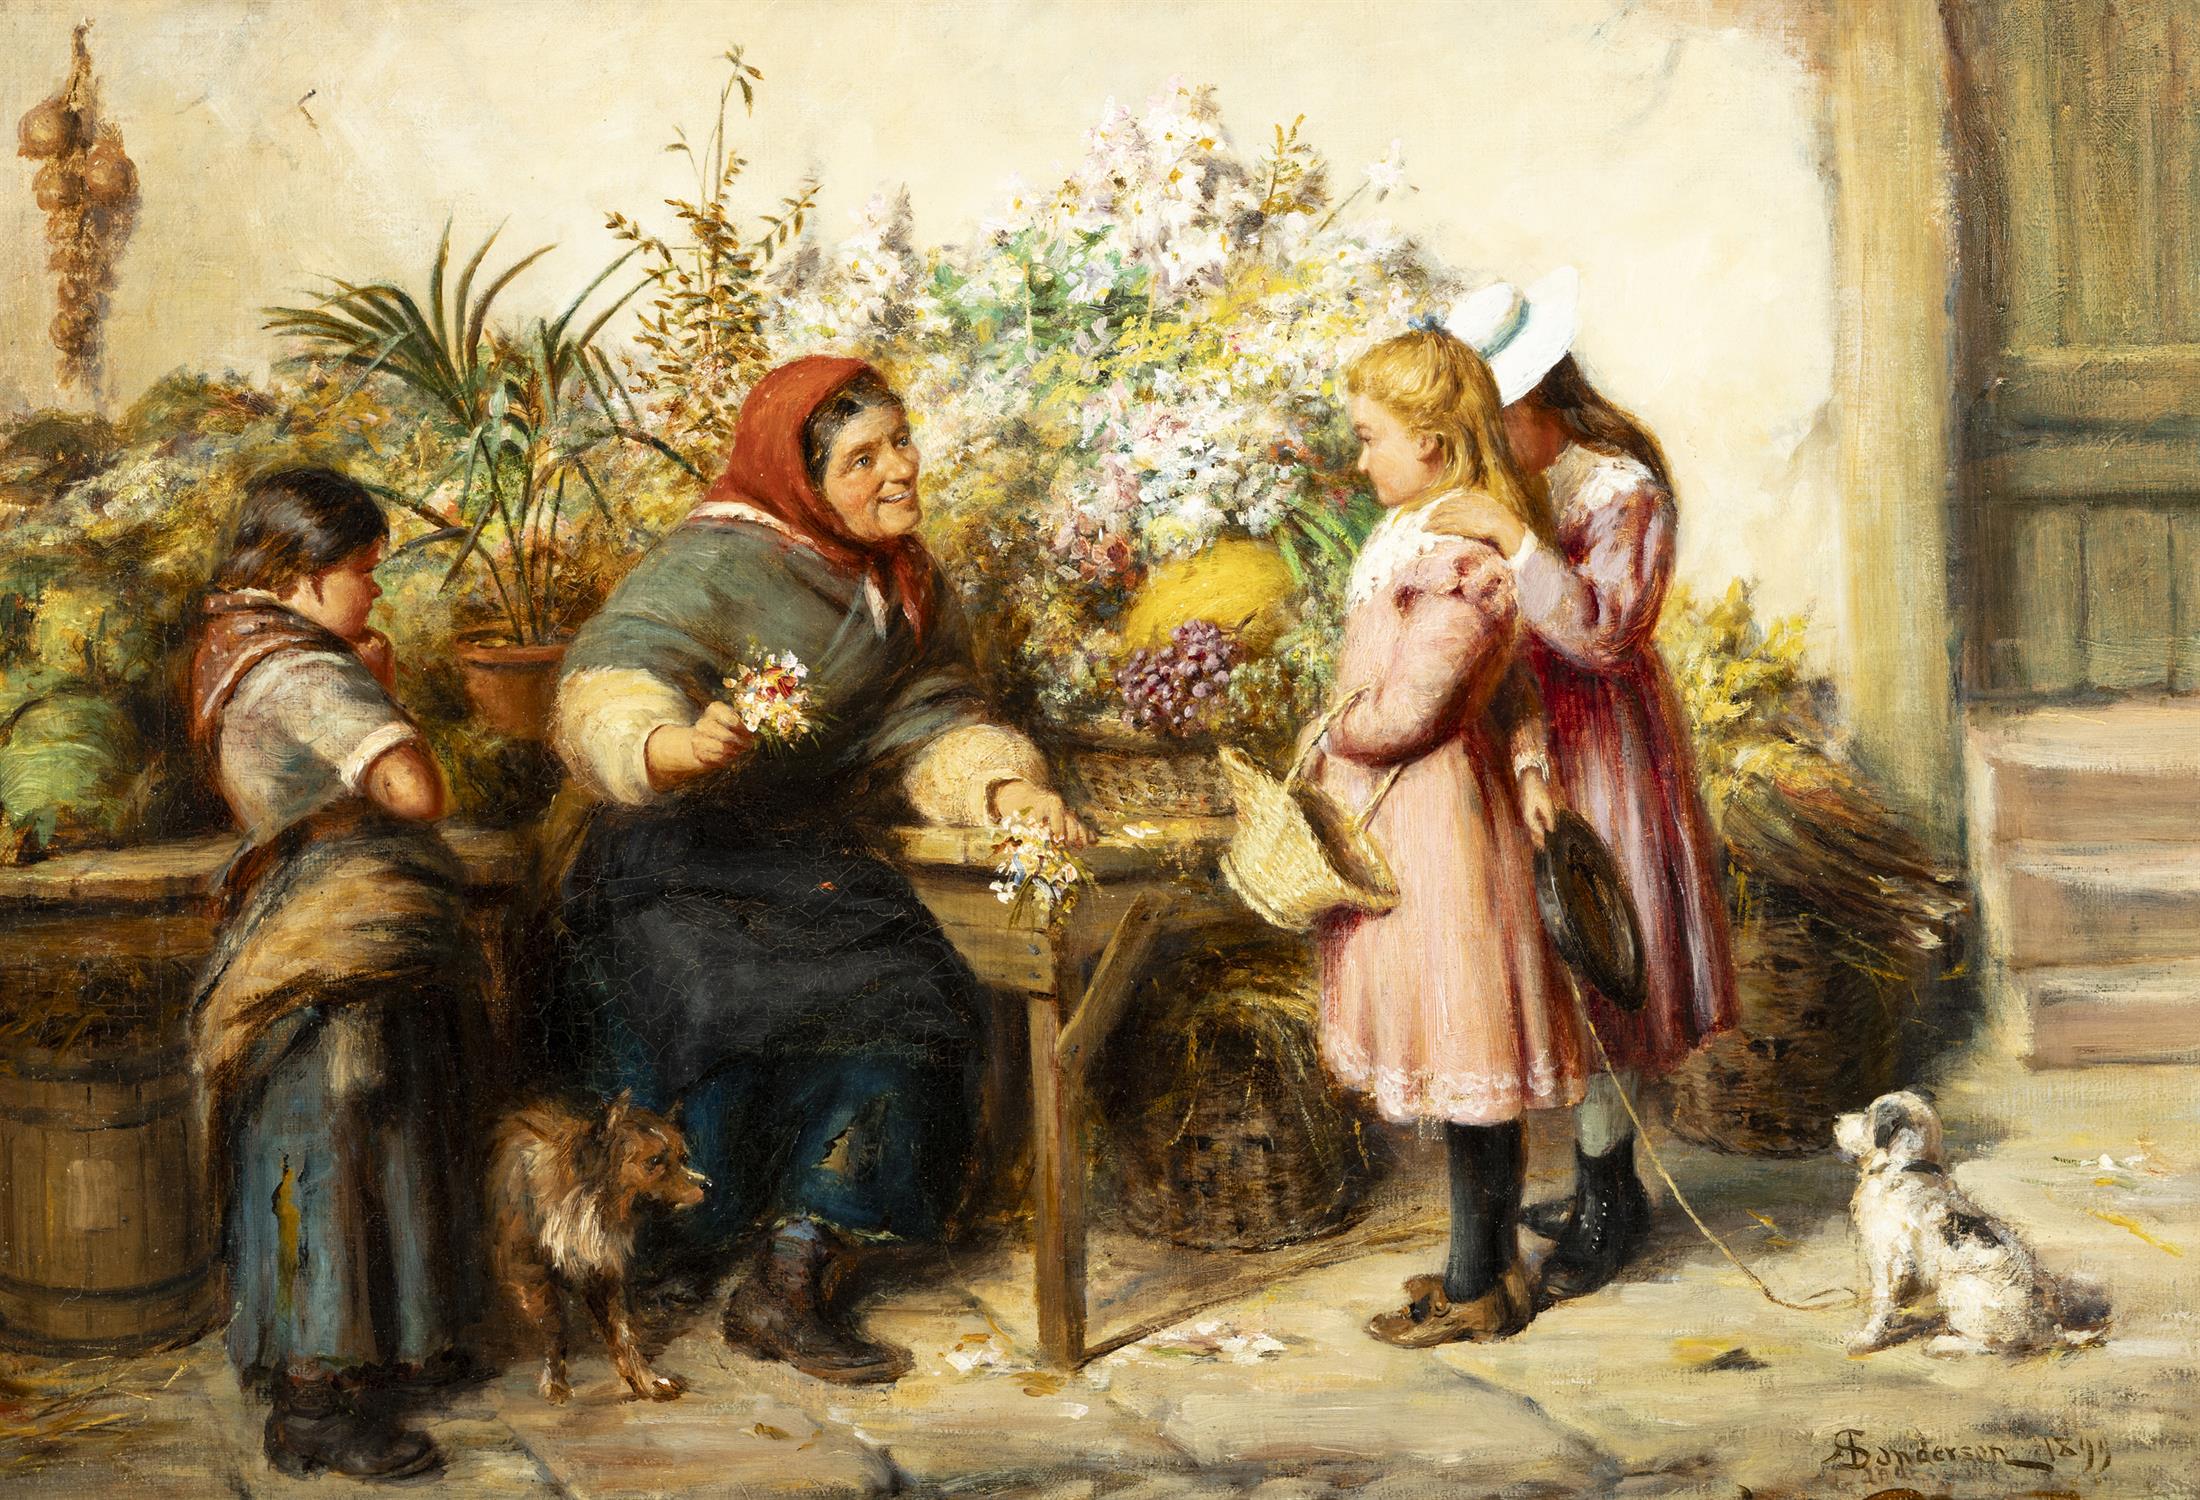 ROBERT SANDERSON (1848-1908) The Flower Stall Oil on canvas, 39.5x 56cm Signed and dated 1899 - Image 2 of 5